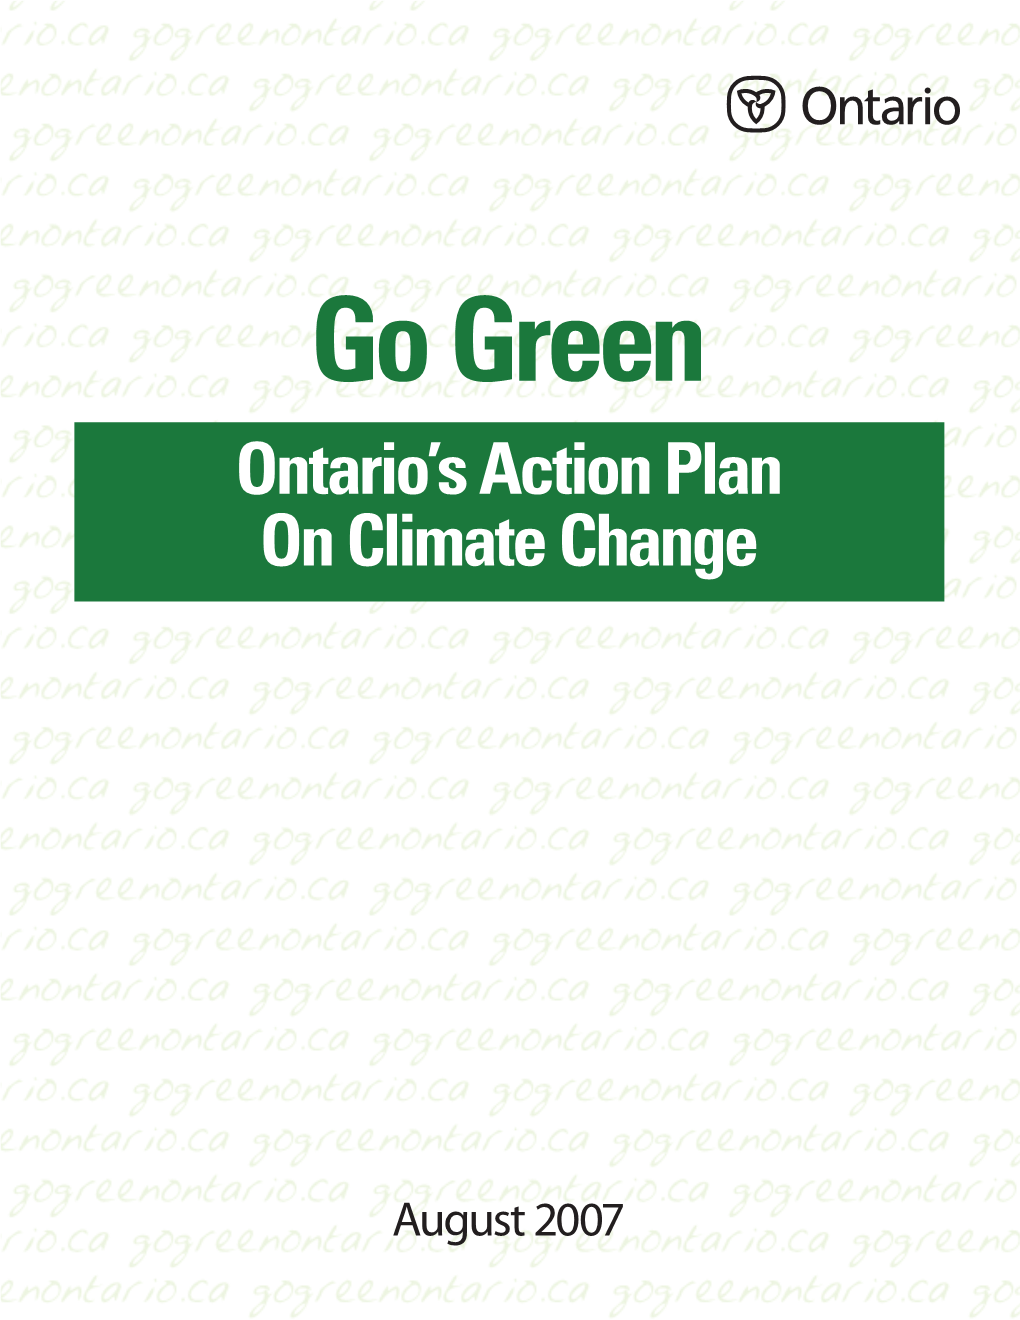 Ontario's “Go Green” Action Plan on Climate Change